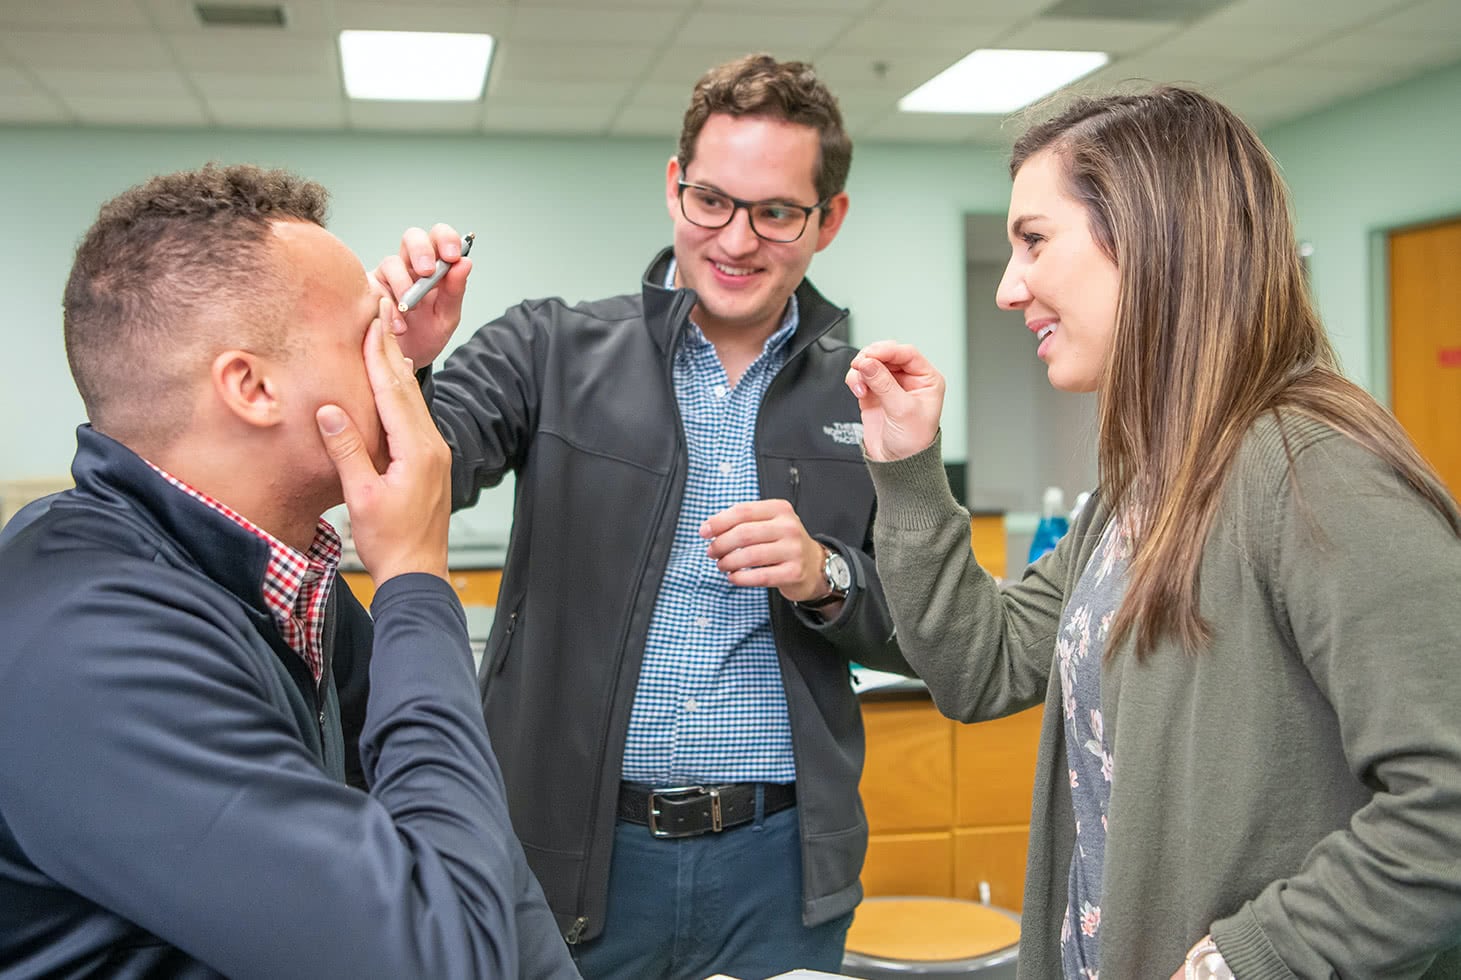 A male student covering his eye while two other students hold a light and examine his other eye at the start of spring semester classes.